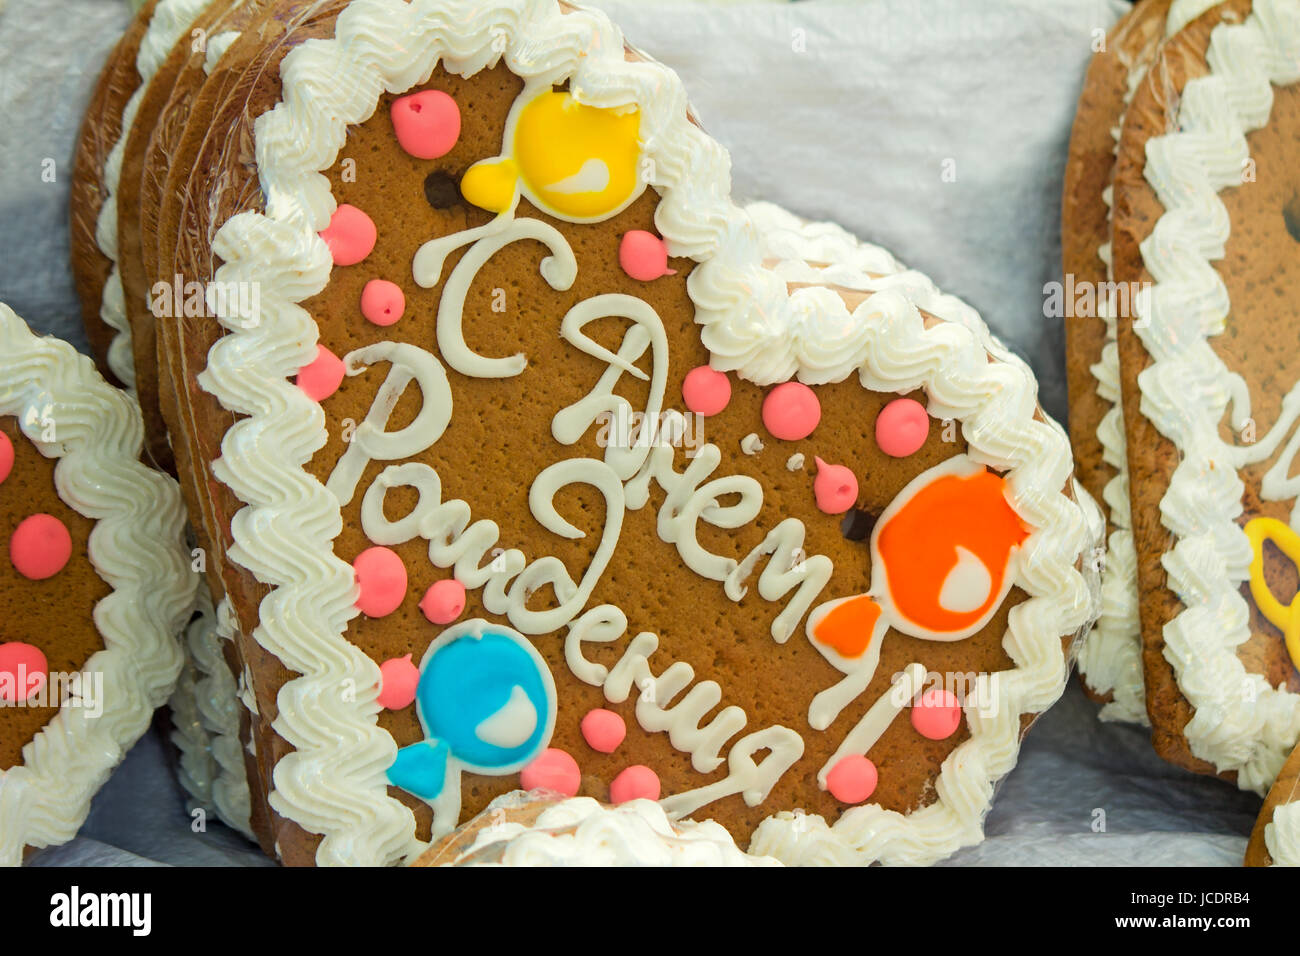 Beautiful pie with ornament in the form of heart and a congratulatory inscription 'Happy birthday' Stock Photo